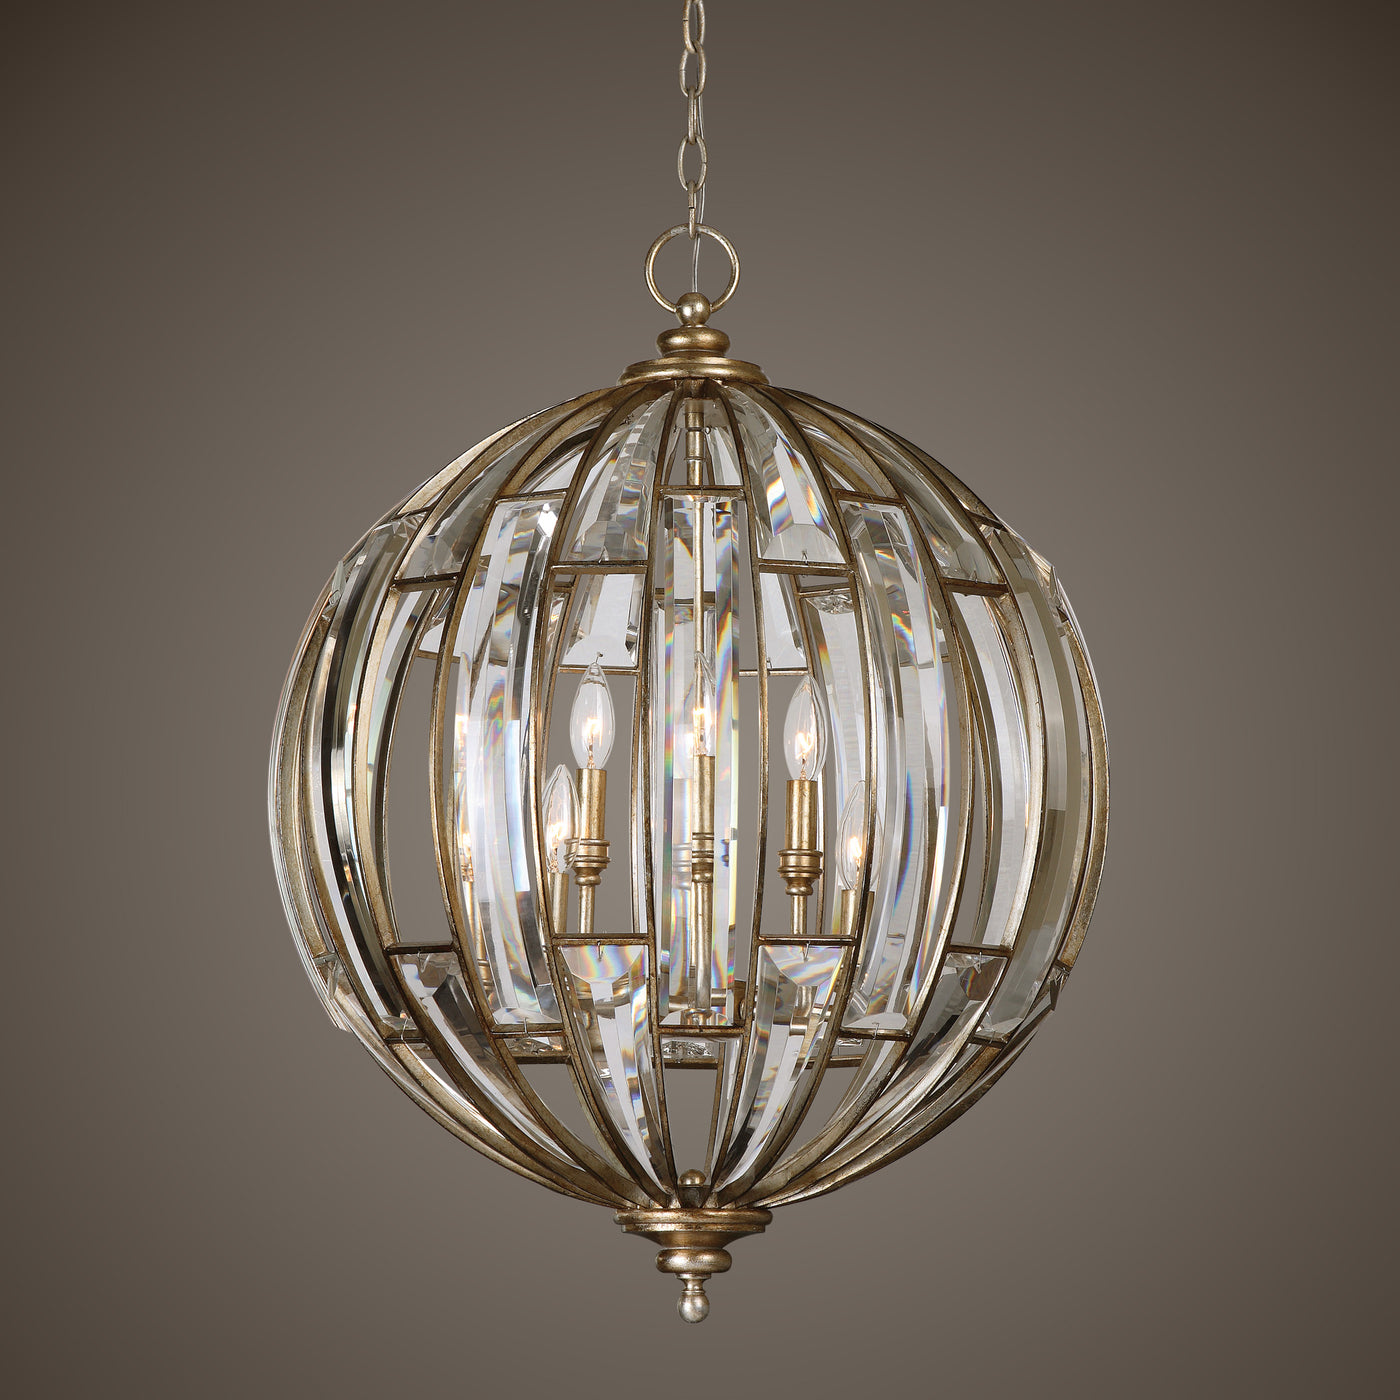 A Statement Of Sumptuous Elegance, A Sphere Of Beveled Crystals Enhanced With Burnished Silver Champagne Leaf Finish, Pres...